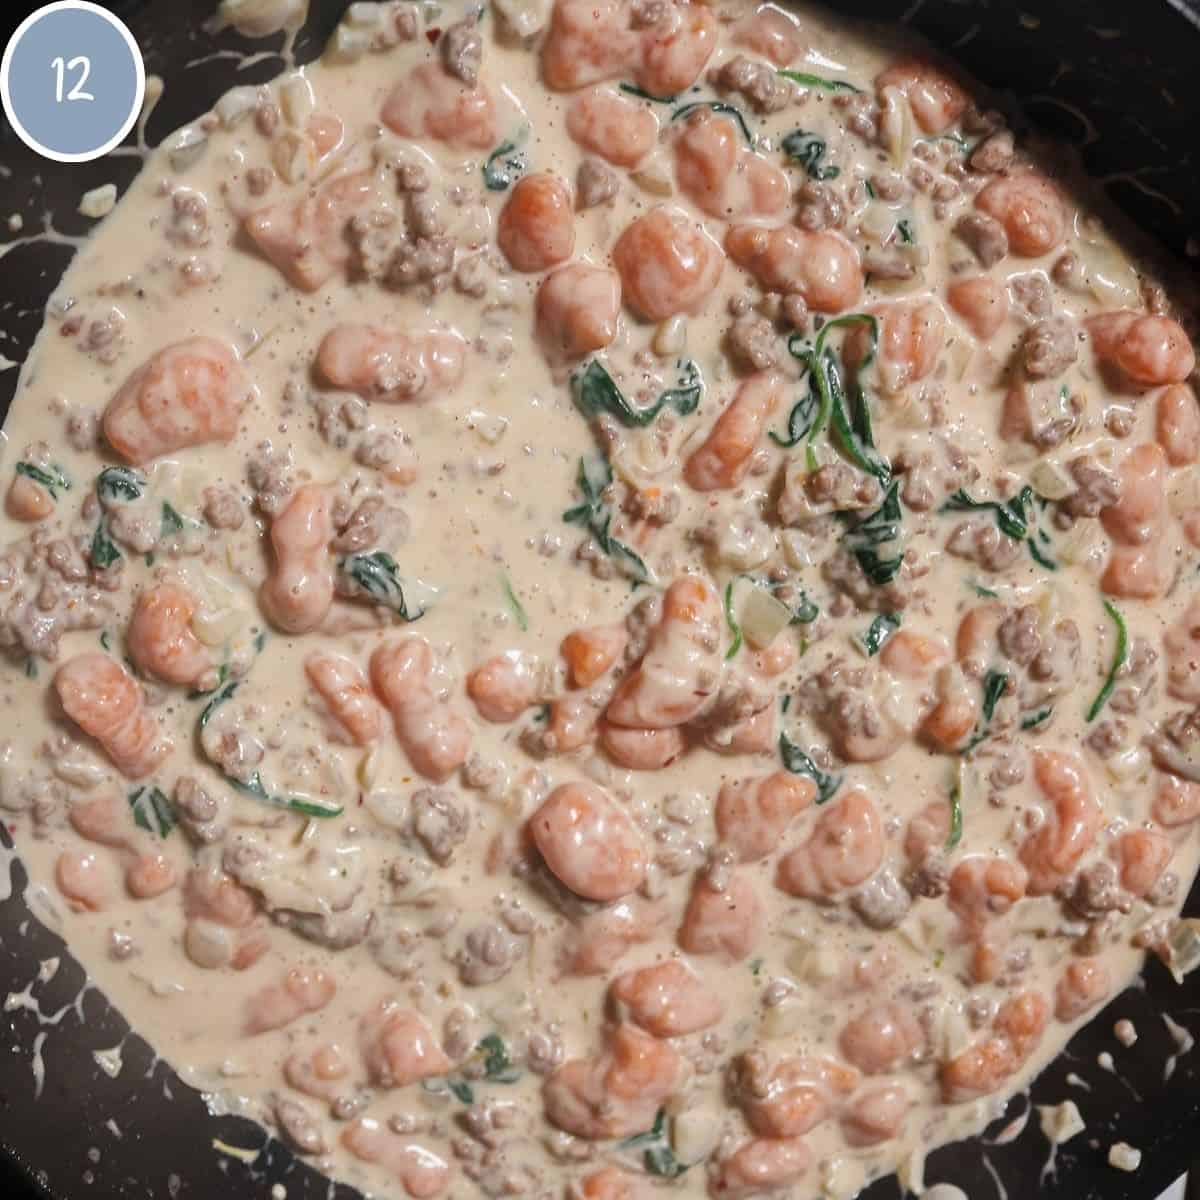 Sweet potato gnocchi combined with the Italian sausage cream sauce with spinach and parmesan.